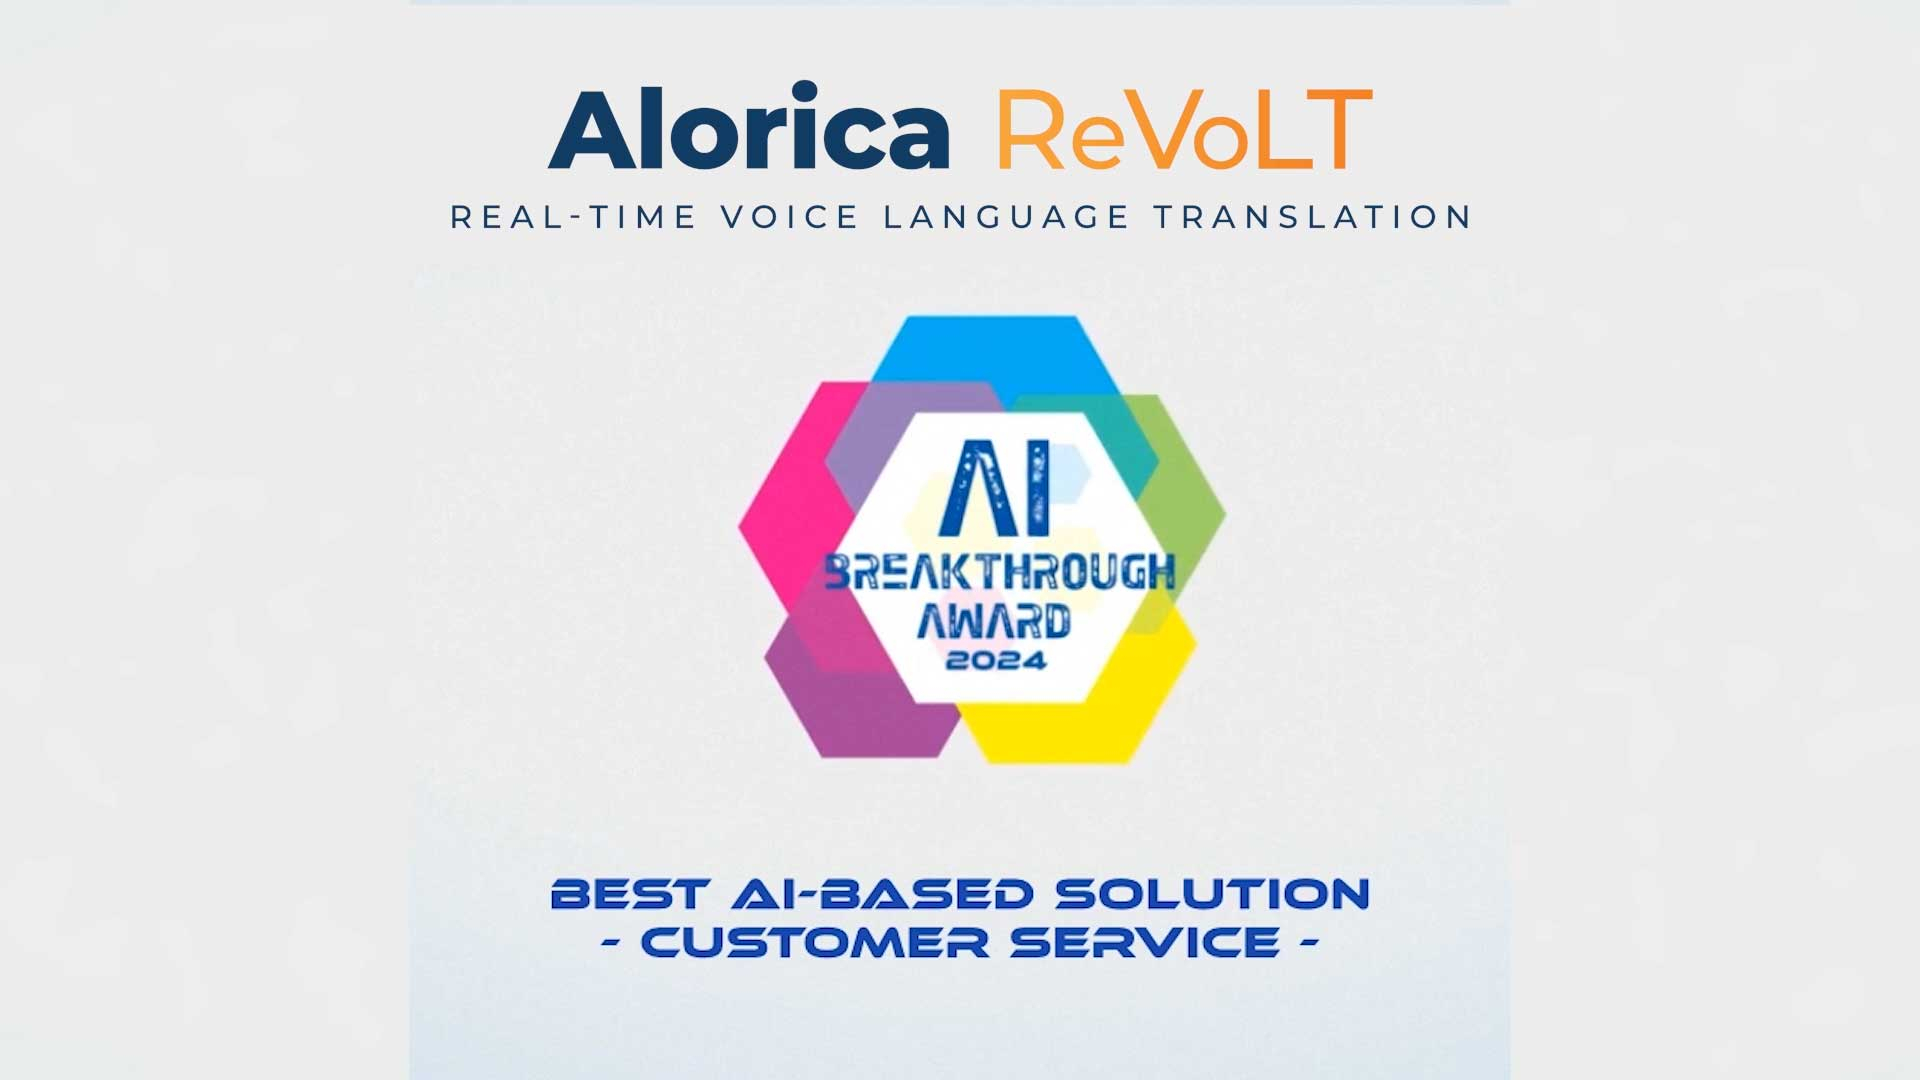 Alorica ReVoLT--Real-time Voice Language Translation--Wins AI Breakthrough Award for Best AI Solution for Customer Service.